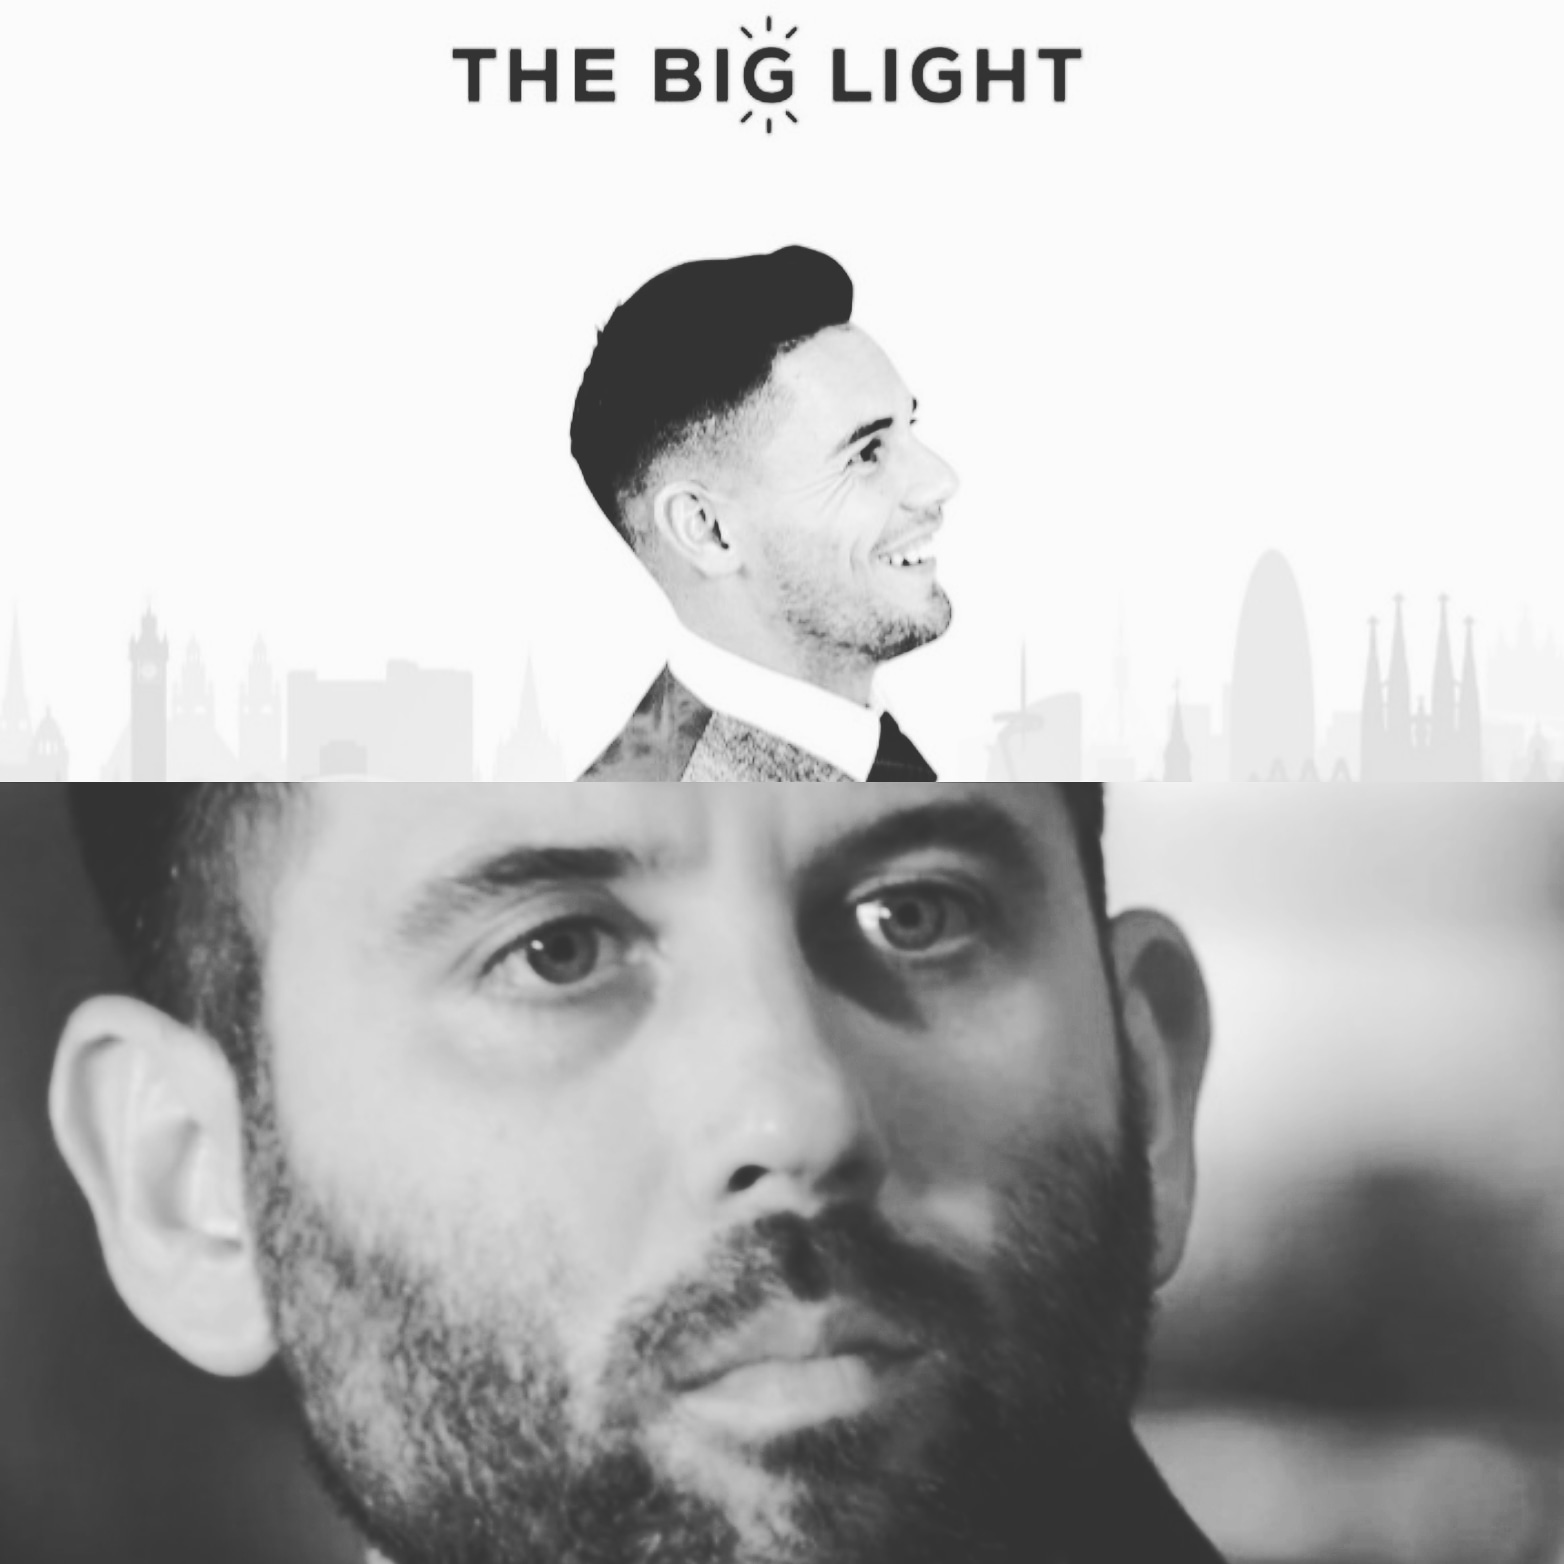 Scheming Hack Myles Bonnar Goes On Cringe Worthy Scottish Podcast “The Big Light” With Bumbling Amateur Host Sean MacDonald, To Justify His Hate Of Masculine Men